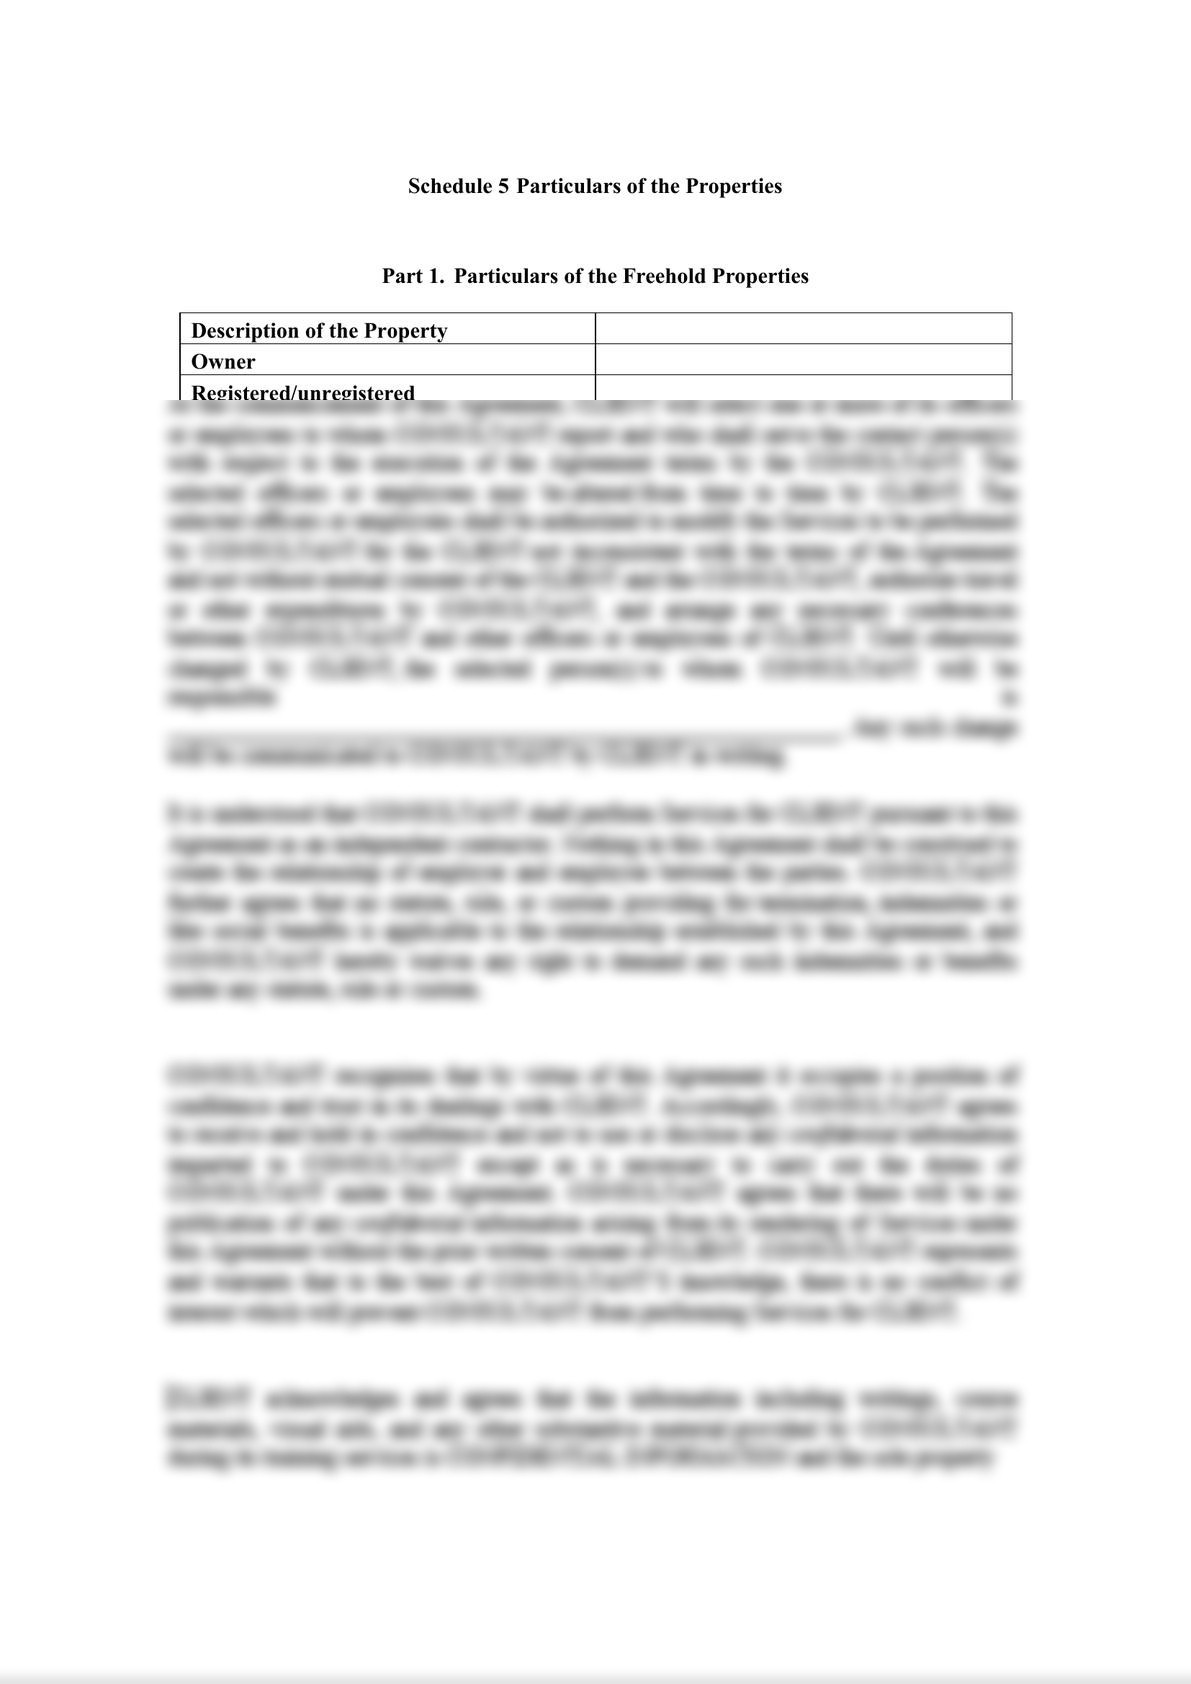 Share Purchase Agreement (M&A)-24